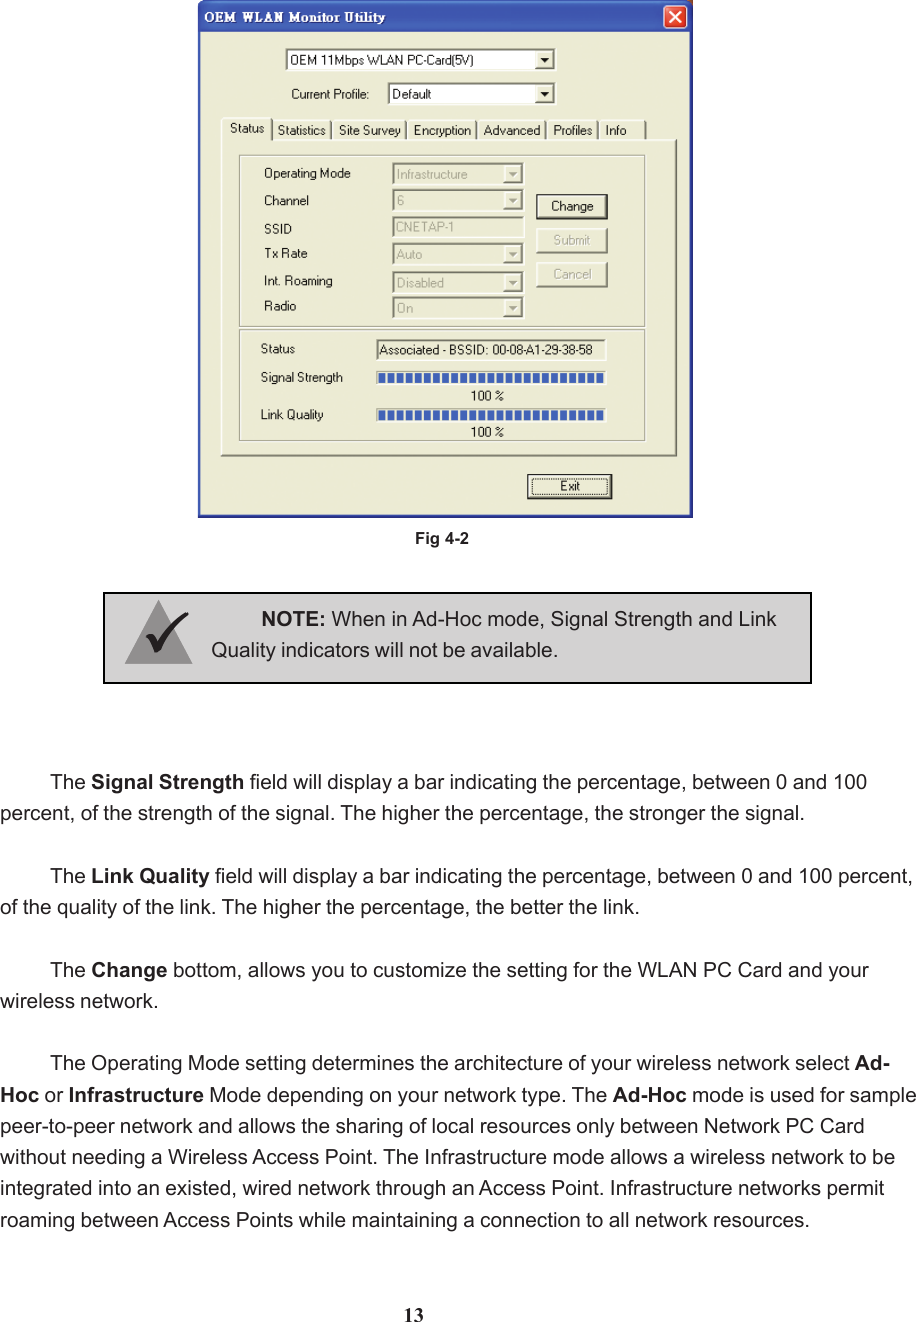 Fig 4-2The Signal Strength field will display a bar indicating the percentage, between 0 and 100percent, of the strength of the signal. The higher the percentage, the stronger the signal.The Link Quality field will display a bar indicating the percentage, between 0 and 100 percent,of the quality of the link. The higher the percentage, the better the link.The Change bottom, allows you to customize the setting for the WLAN PC Card and yourwireless network.The Operating Mode setting determines the architecture of your wireless network select Ad-Hoc or Infrastructure Mode depending on your network type. The Ad-Hoc mode is used for samplepeer-to-peer network and allows the sharing of local resources only between Network PC Cardwithout needing a Wireless Access Point. The Infrastructure mode allows a wireless network to beintegrated into an existed, wired network through an Access Point. Infrastructure networks permitroaming between Access Points while maintaining a connection to all network resources.NOTE: When in Ad-Hoc mode, Signal Strength and LinkQuality indicators will not be available.3333313